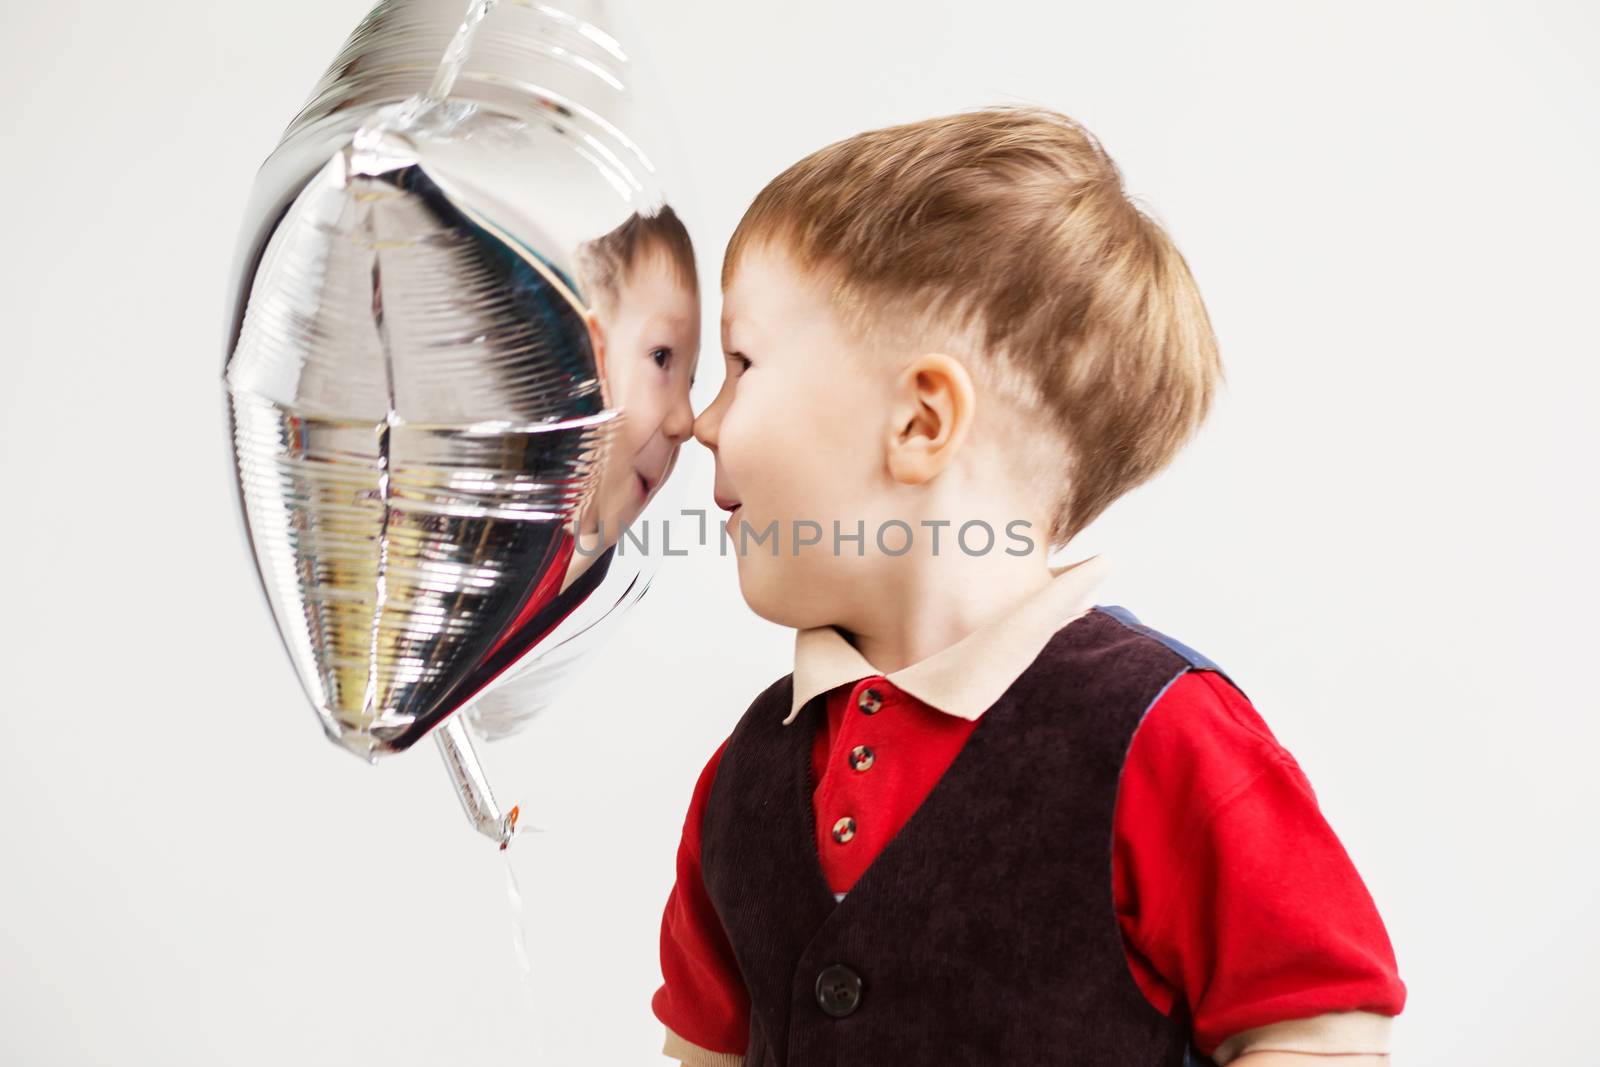 Boy grimacing and playing the ape with star-shaped balloons in studio. Kid looks and rejoices at his reflection in foil balloon. Child laughing looking at the reflection in a distorted mirror